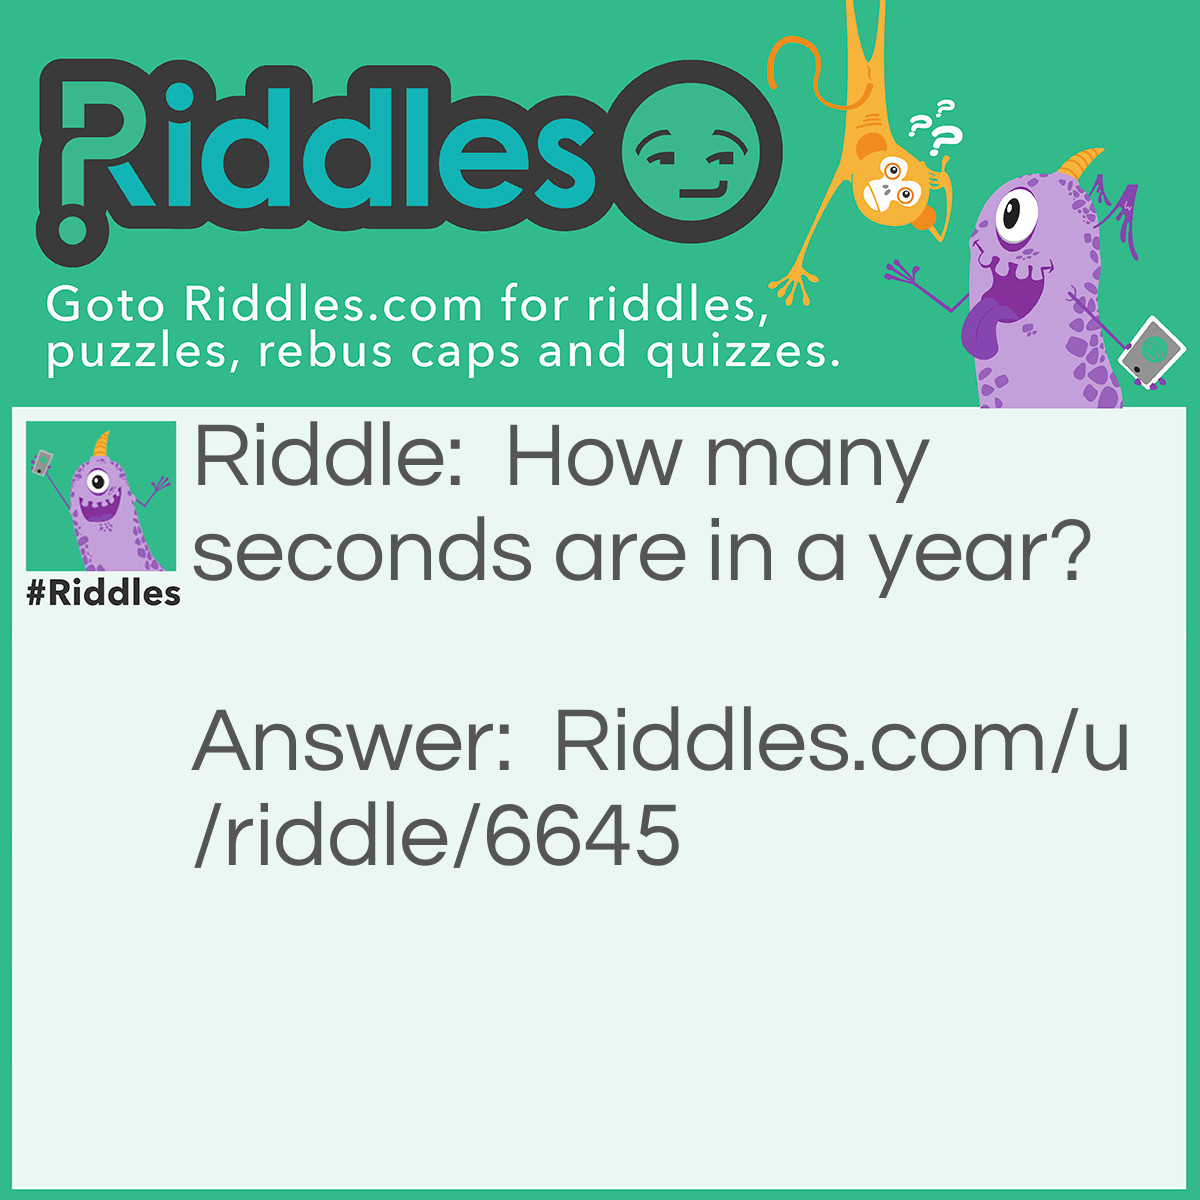 Riddle: How many seconds are in a year? Answer: 12 (January 2nd, February 2nd, March 2nd etc.